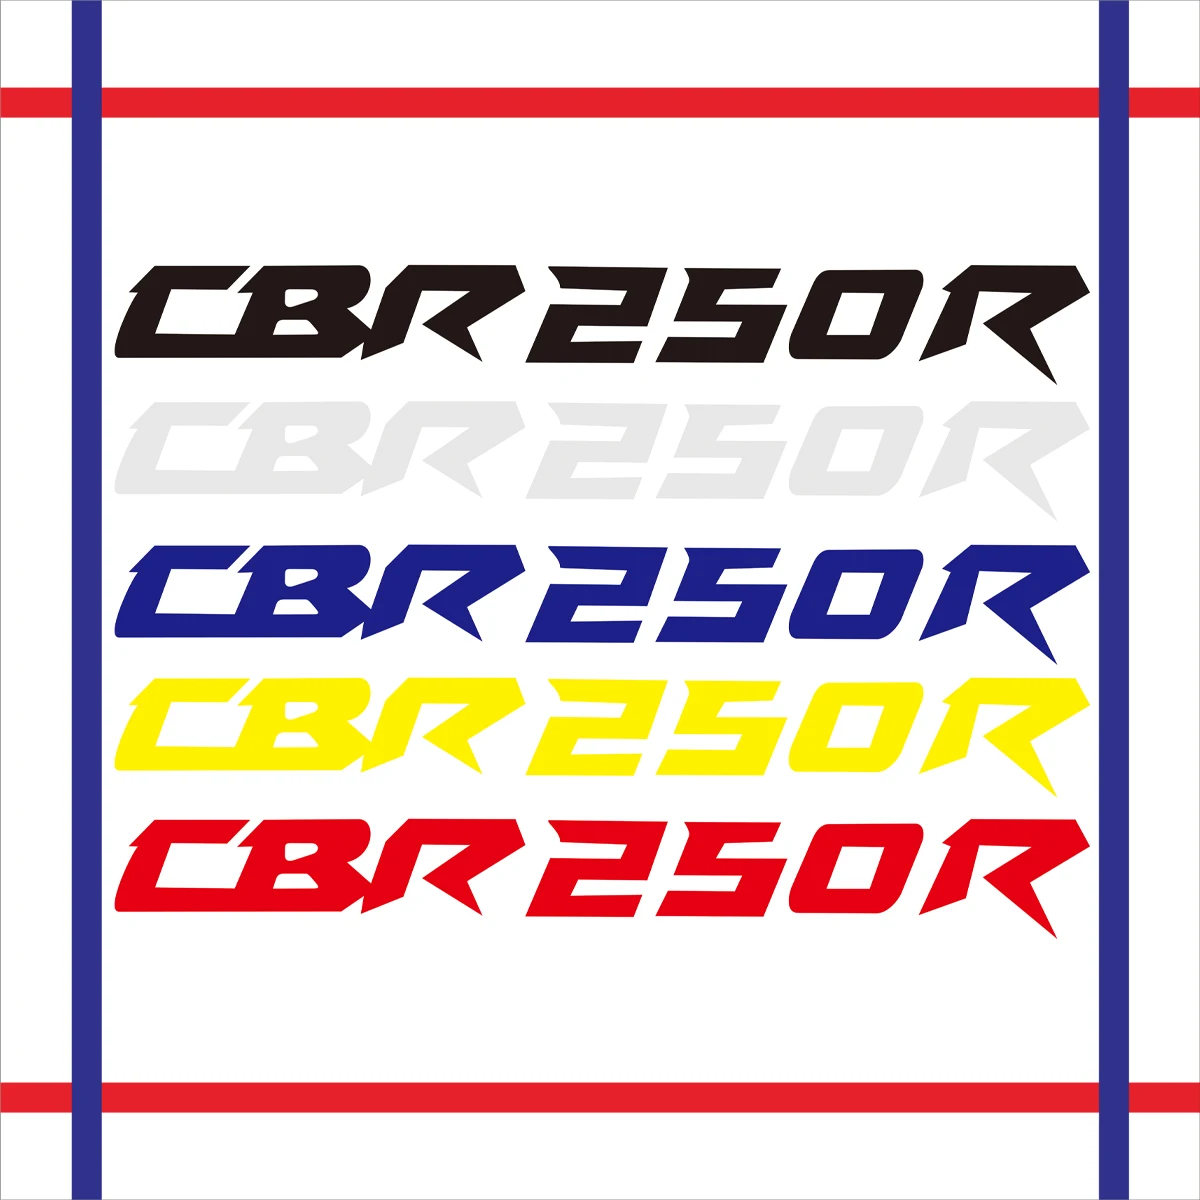 2PCS Reflective Motorcycle Wheels Fairing Helmet Tank Pad Decoration Logo Accessories Stickers Decals For HONDA CBR250R CBR250 R 2pcs vacuum cleaner 6 arms side brushes for roborock s50 s51 s55 robot vacuum accessories